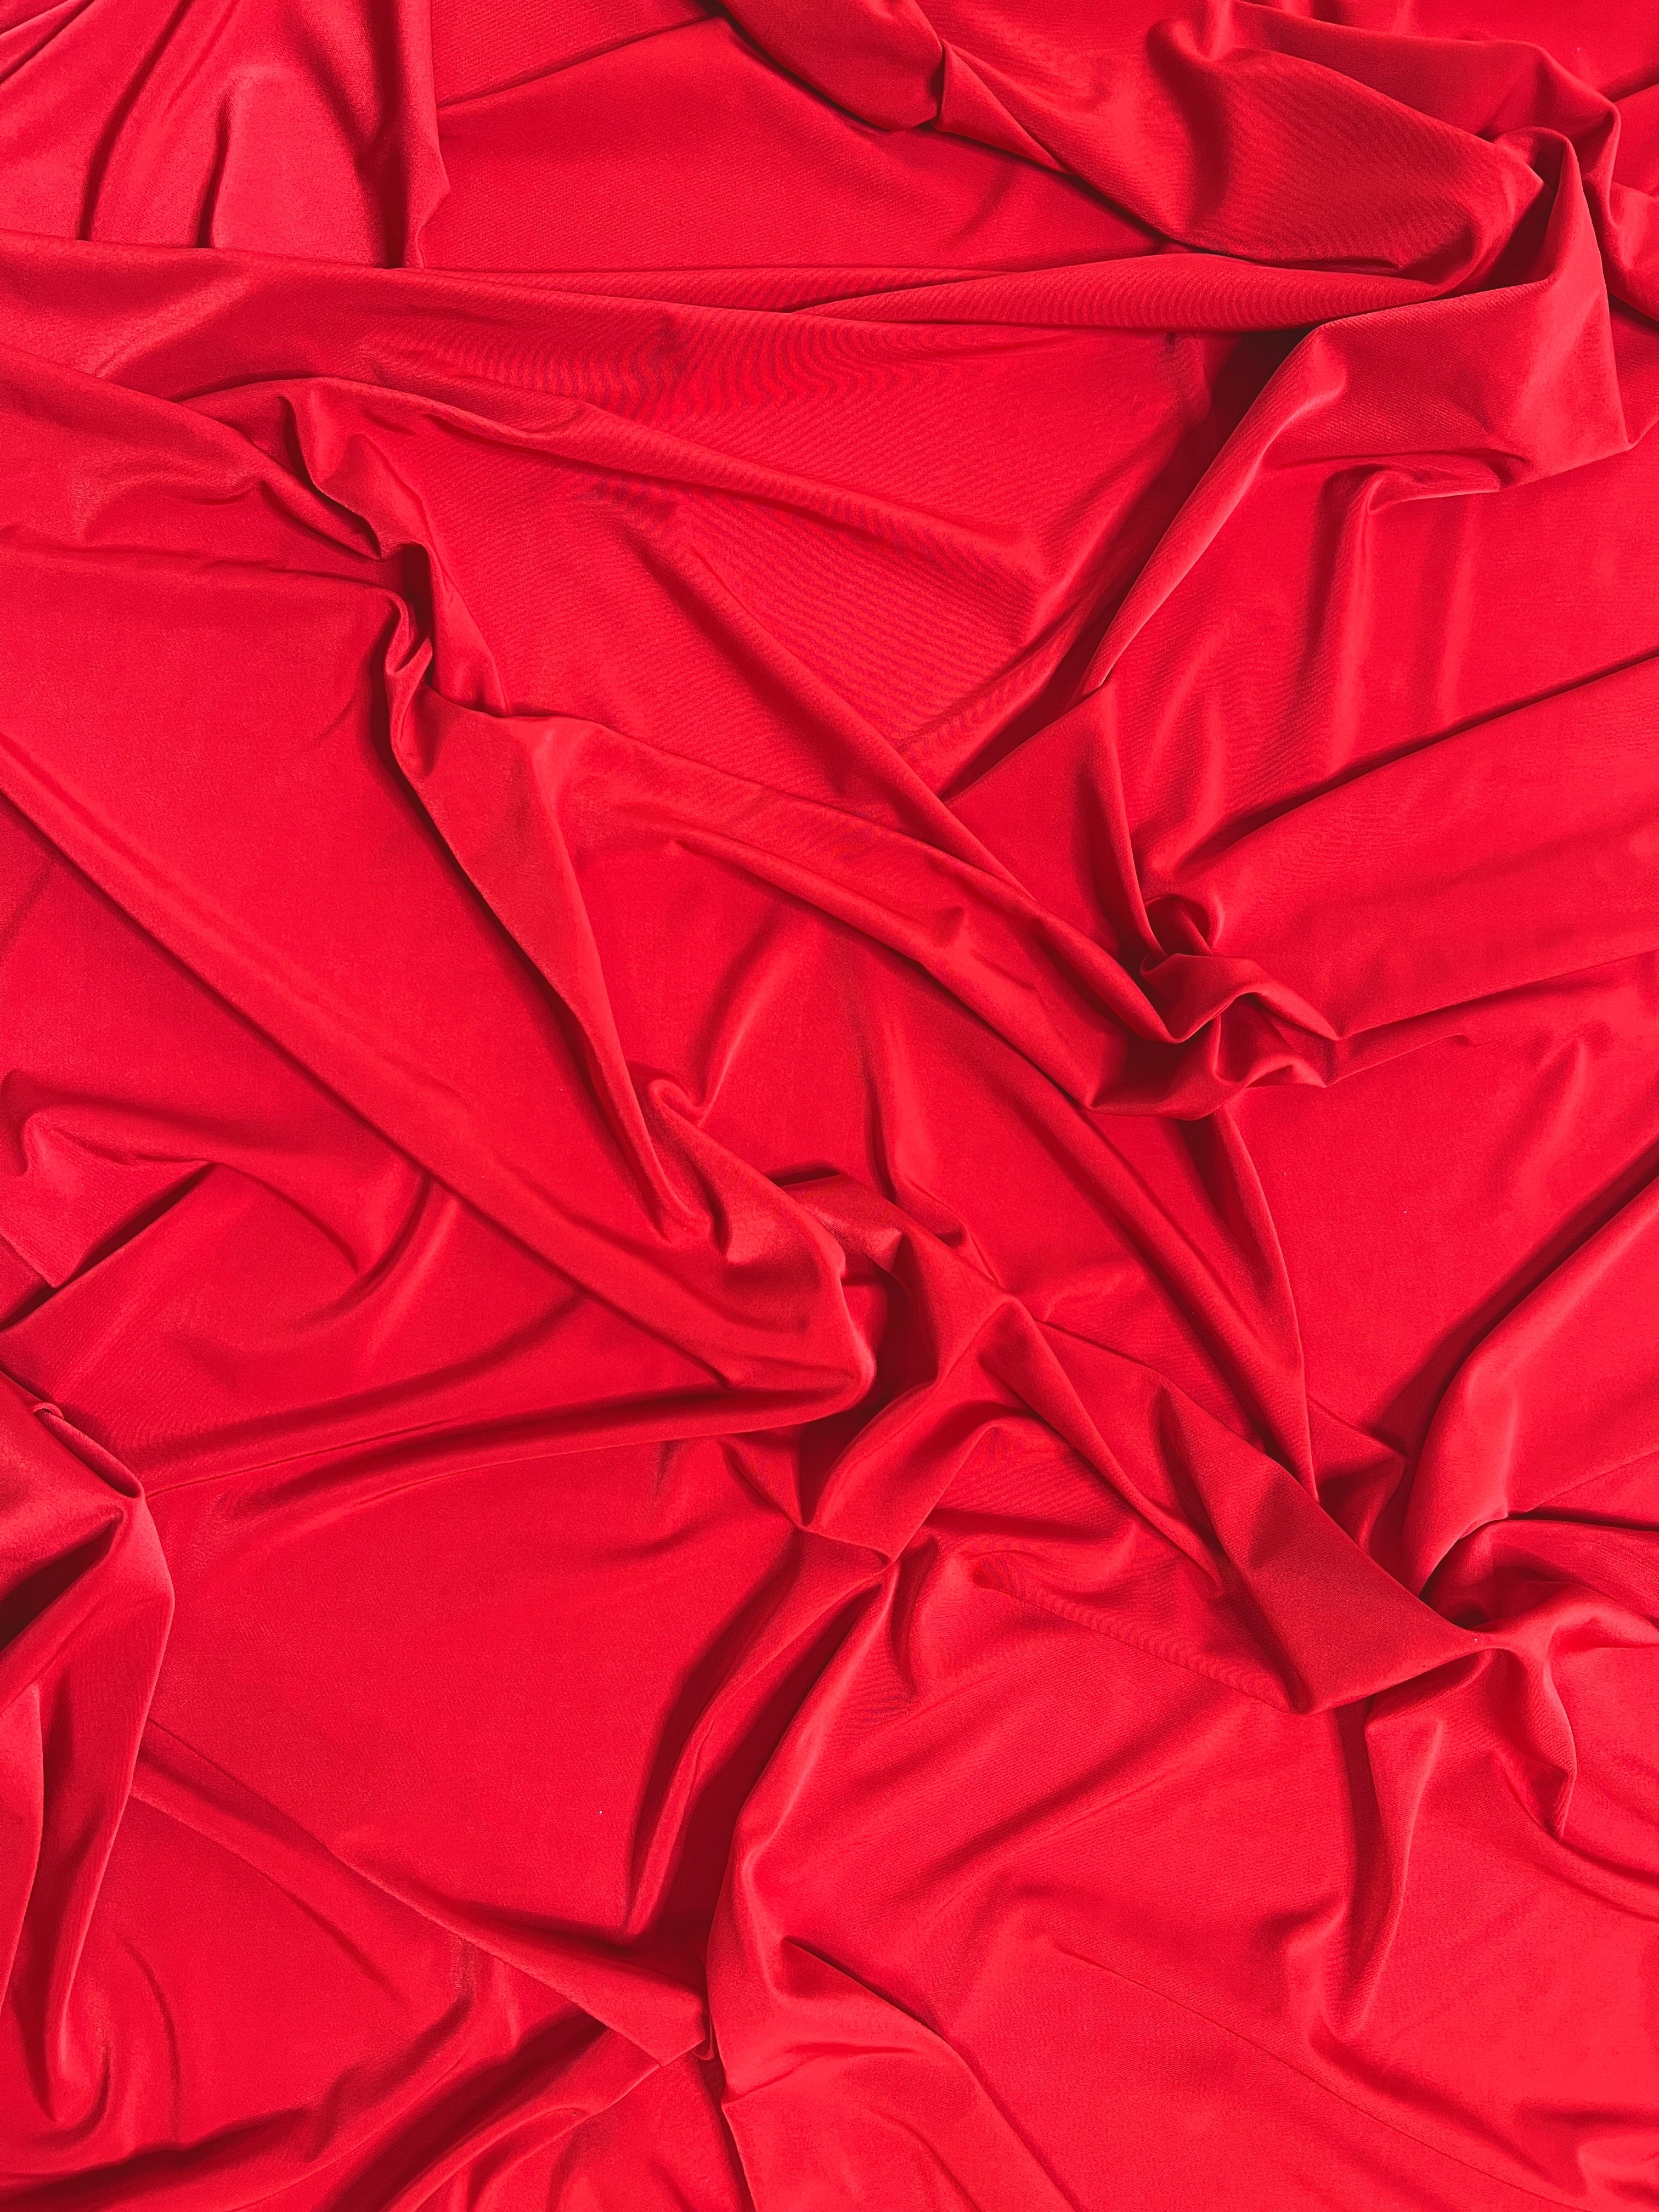 red ity spandex, 4 way stretch ity spandex, dark red ity spandex, shiny red ity spandex, ity spandex for woman in red, spandex for costume, spandex for sweatpants, spandex for gown, spandex on discount, spandex in low price, ity fabric on sale